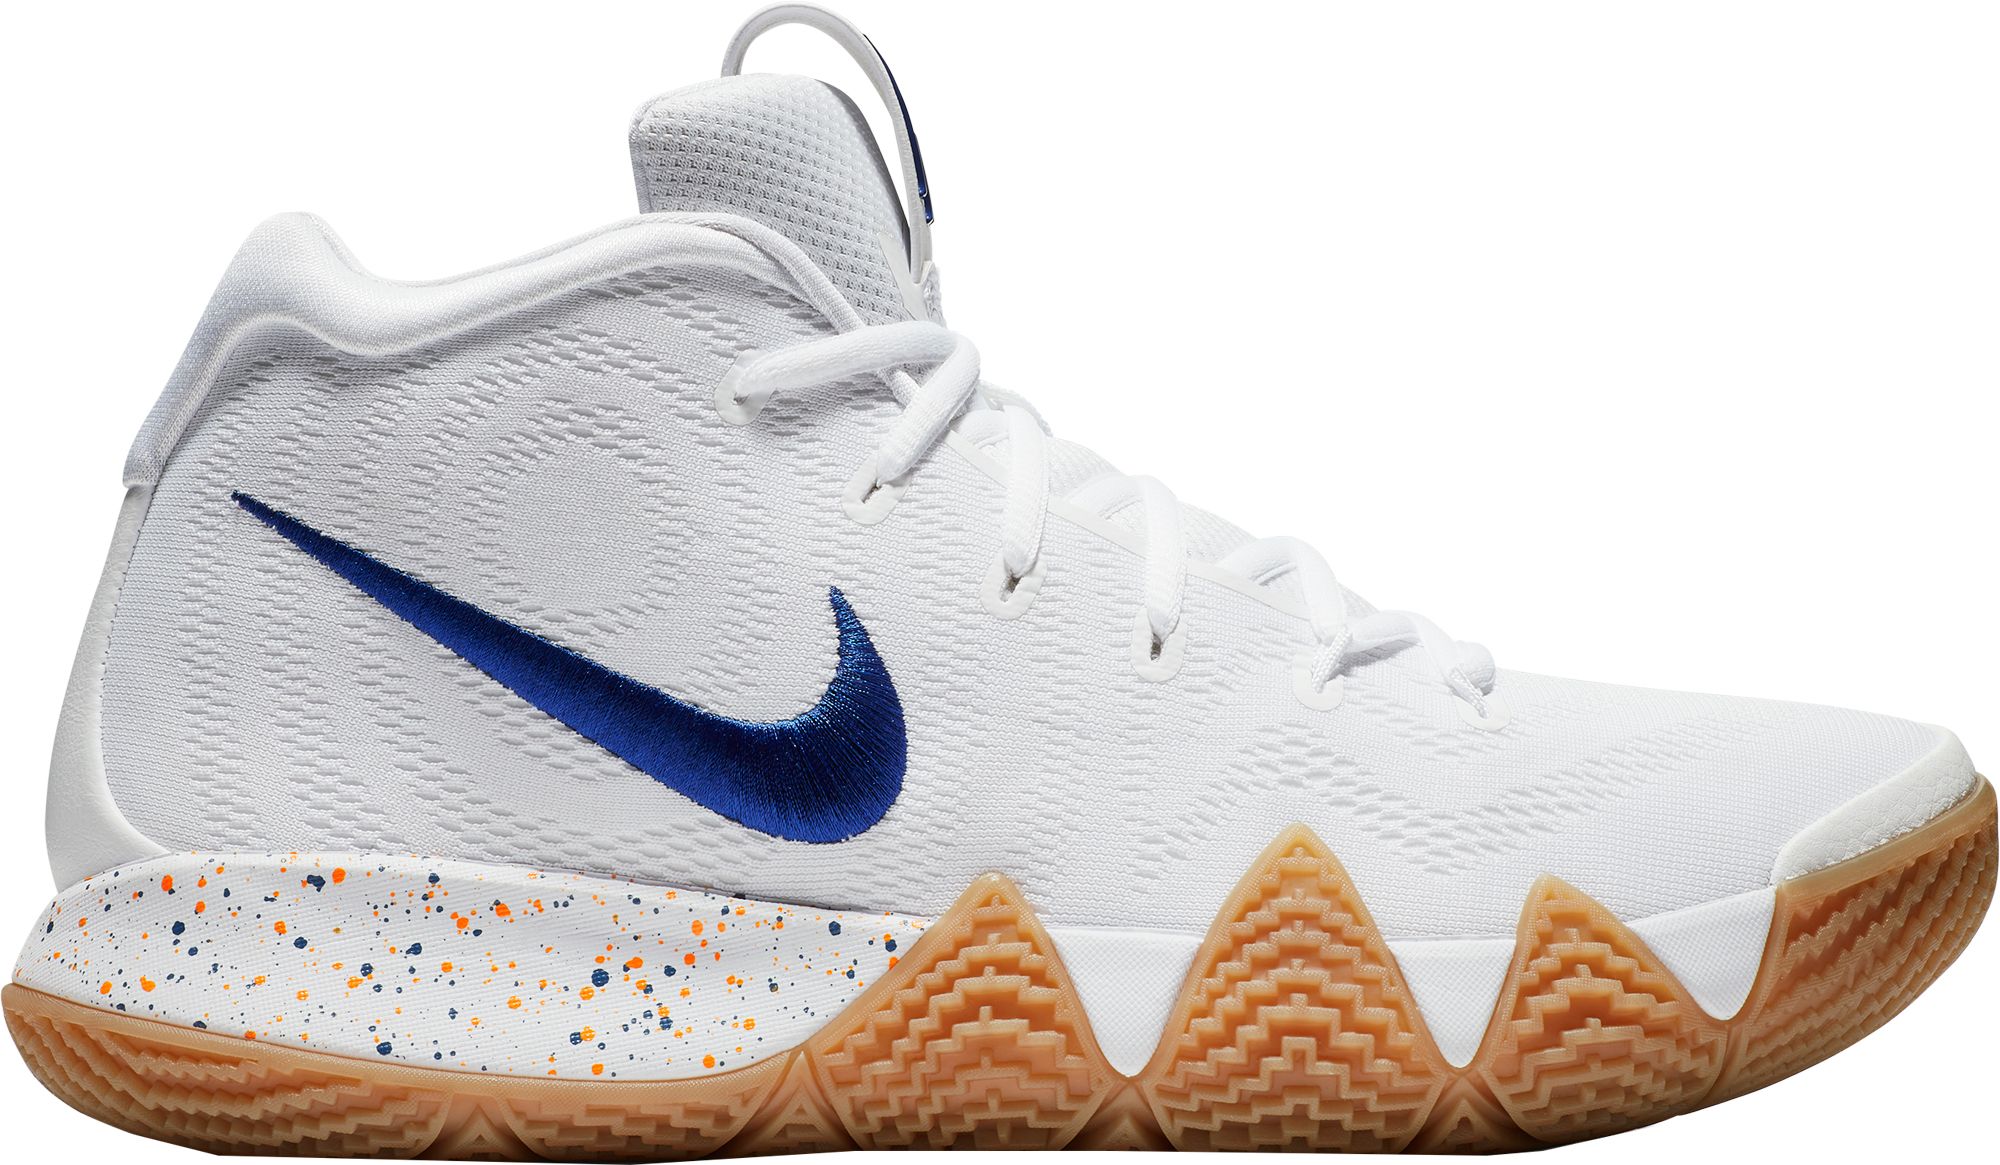 womens kyrie 5 basketball shoes